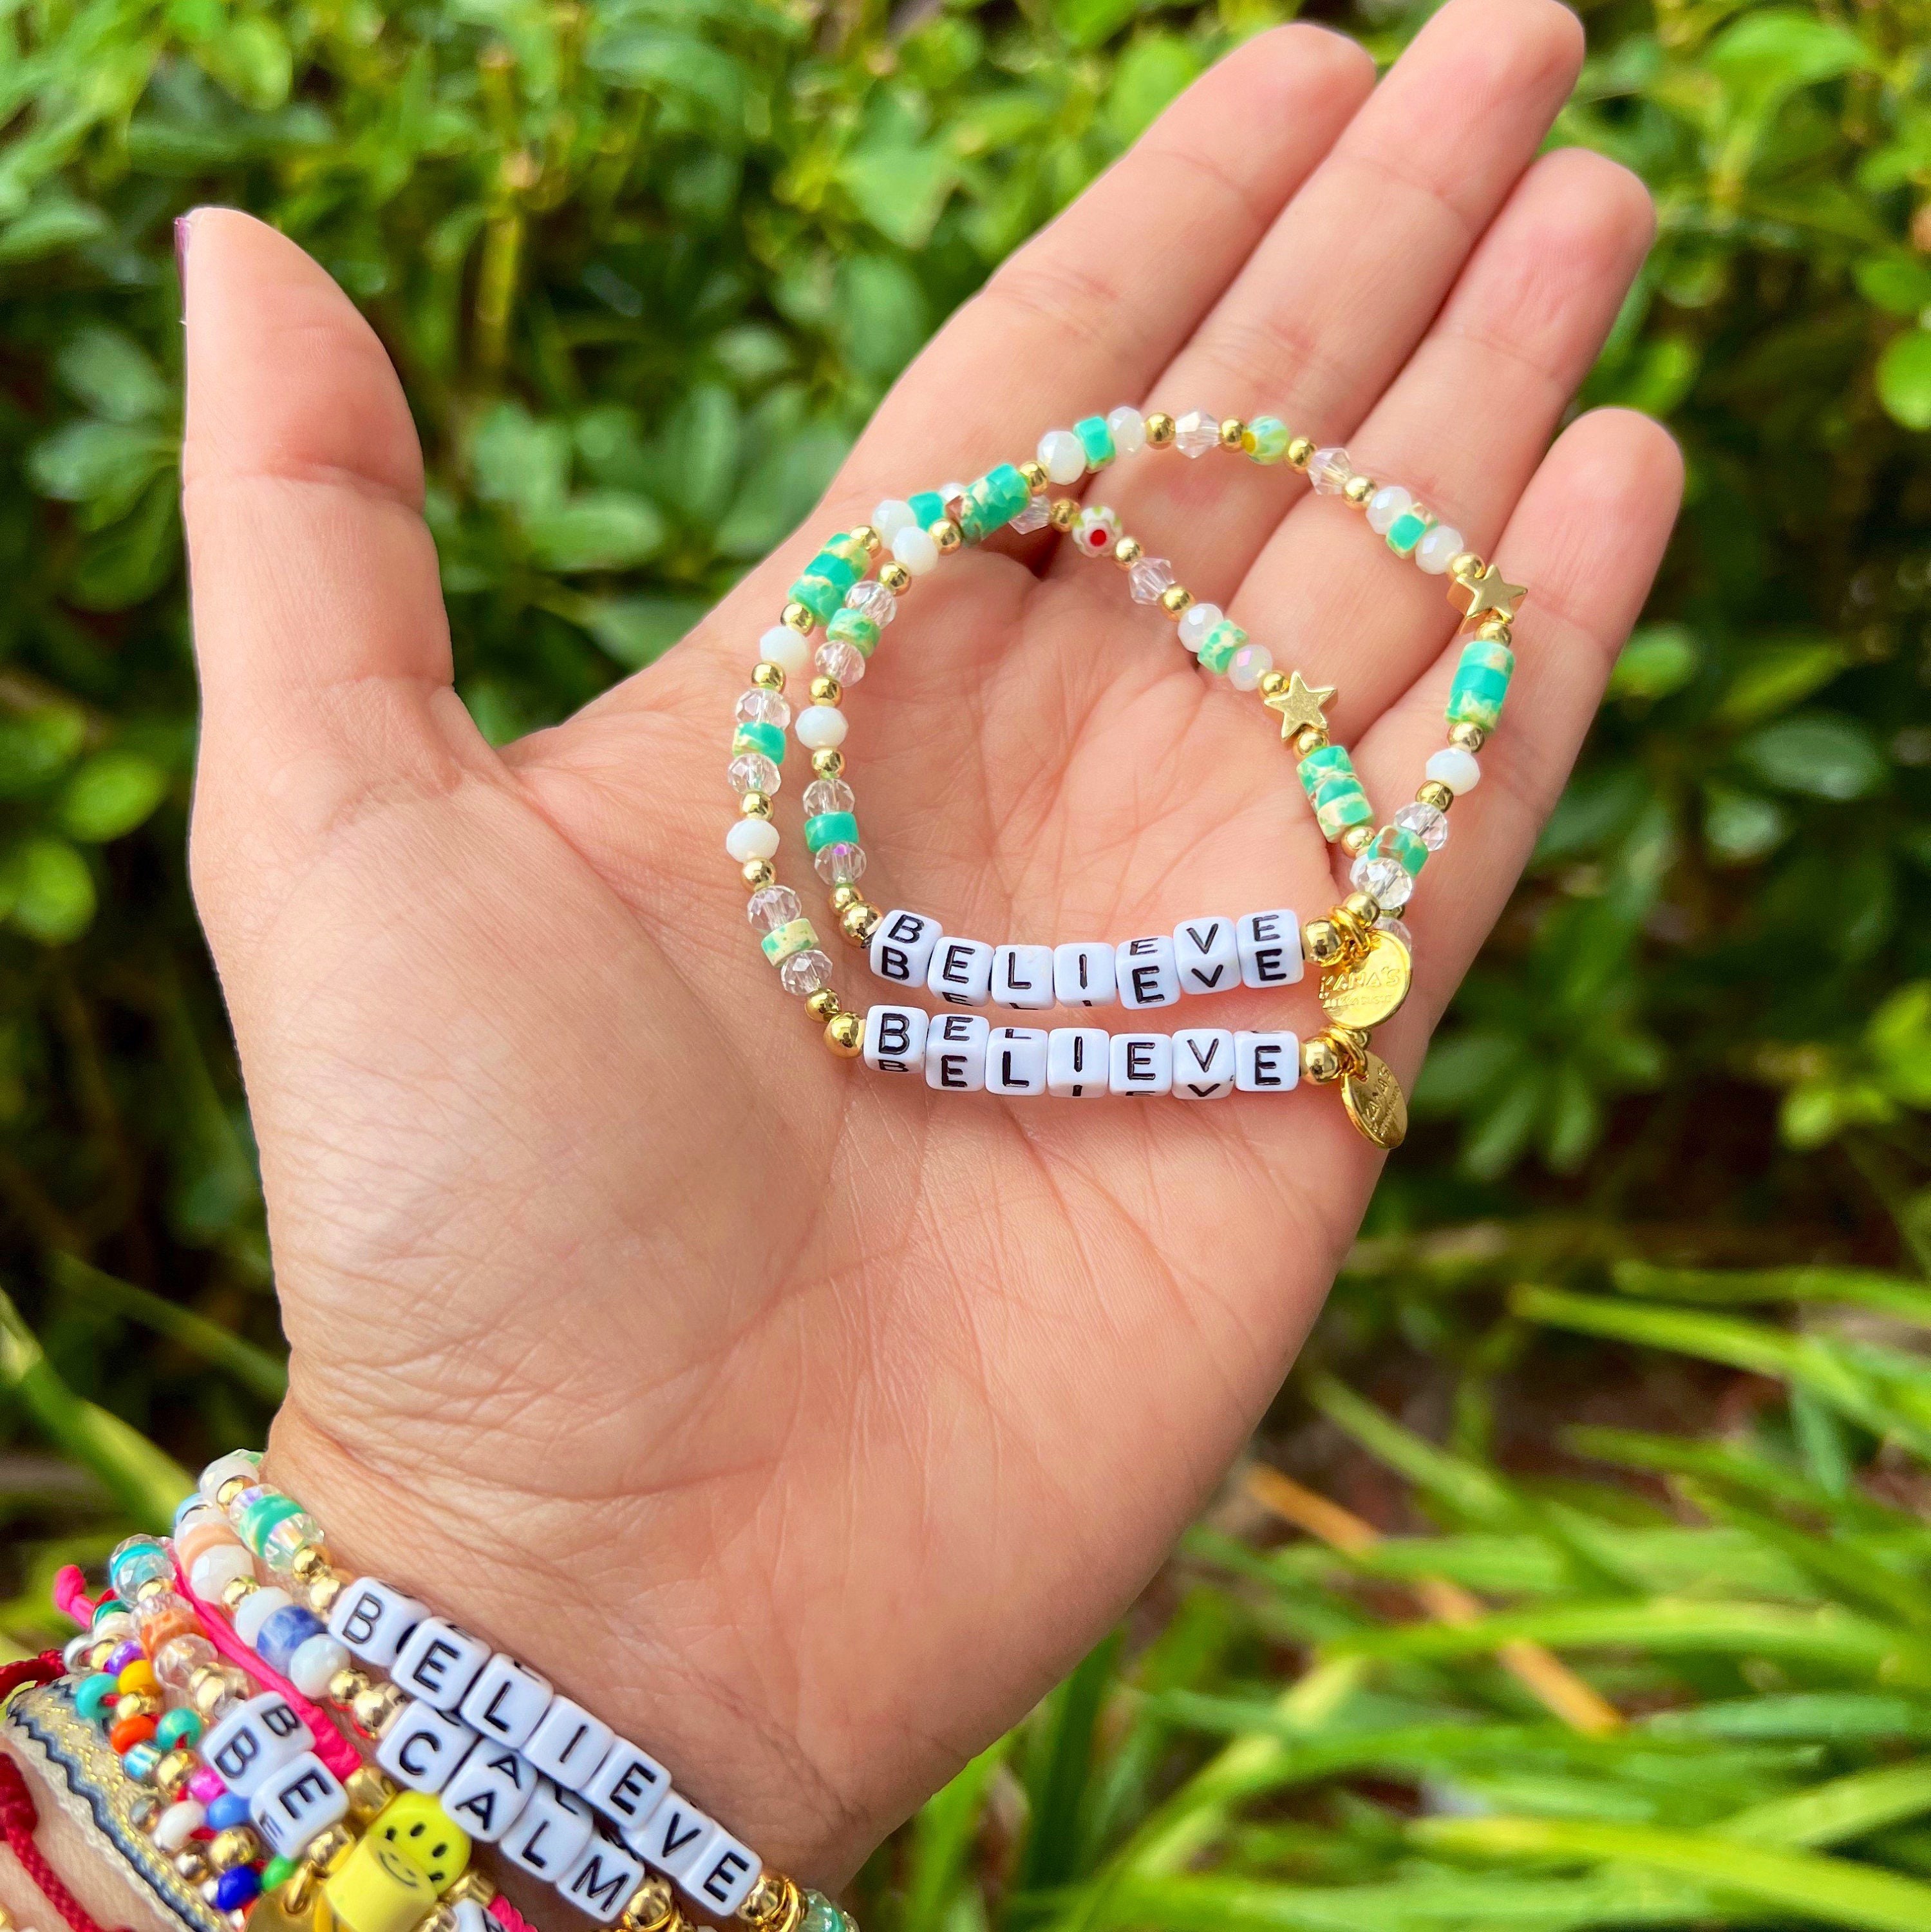 33 Best Beaded Bracelets To Give Your Wrists Some Flair